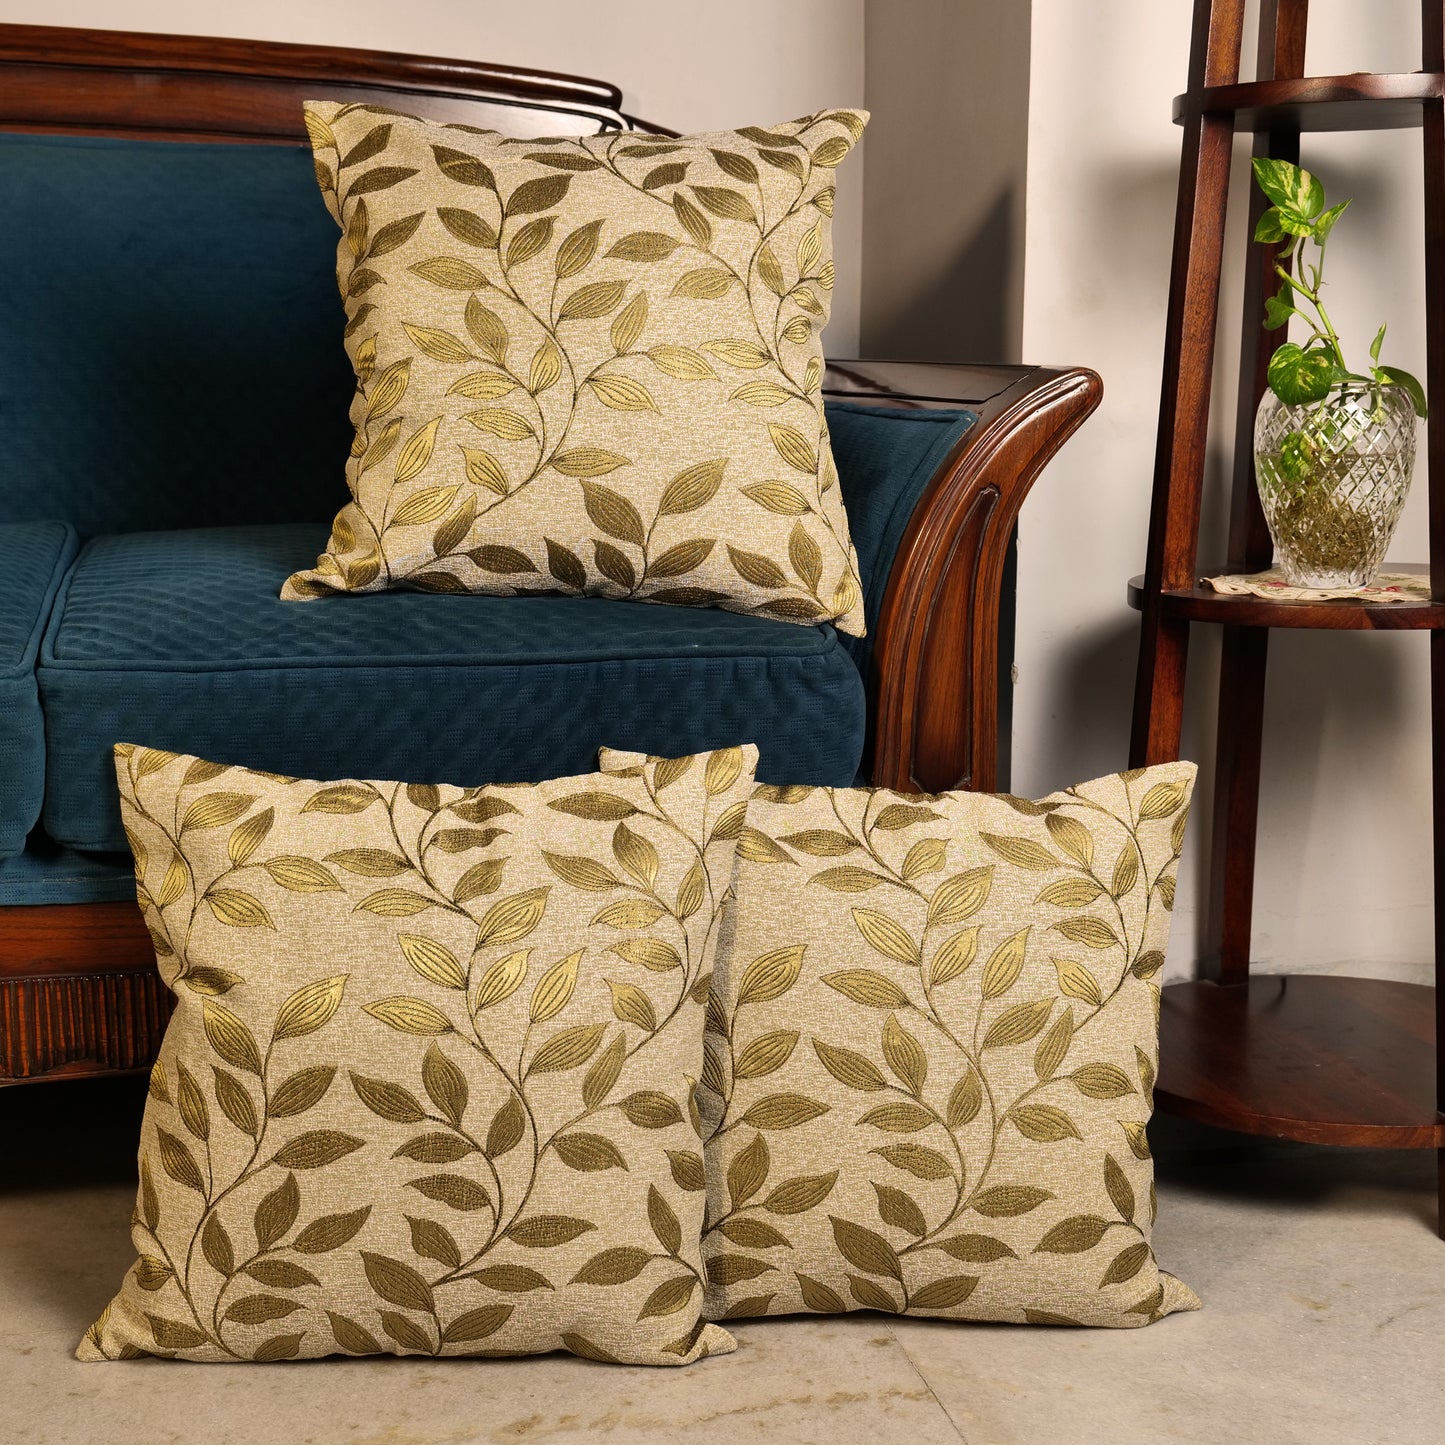 'Golden Leaves' Mehndi Green Textured Cotton Cushion Covers (16 x 16 Inch)